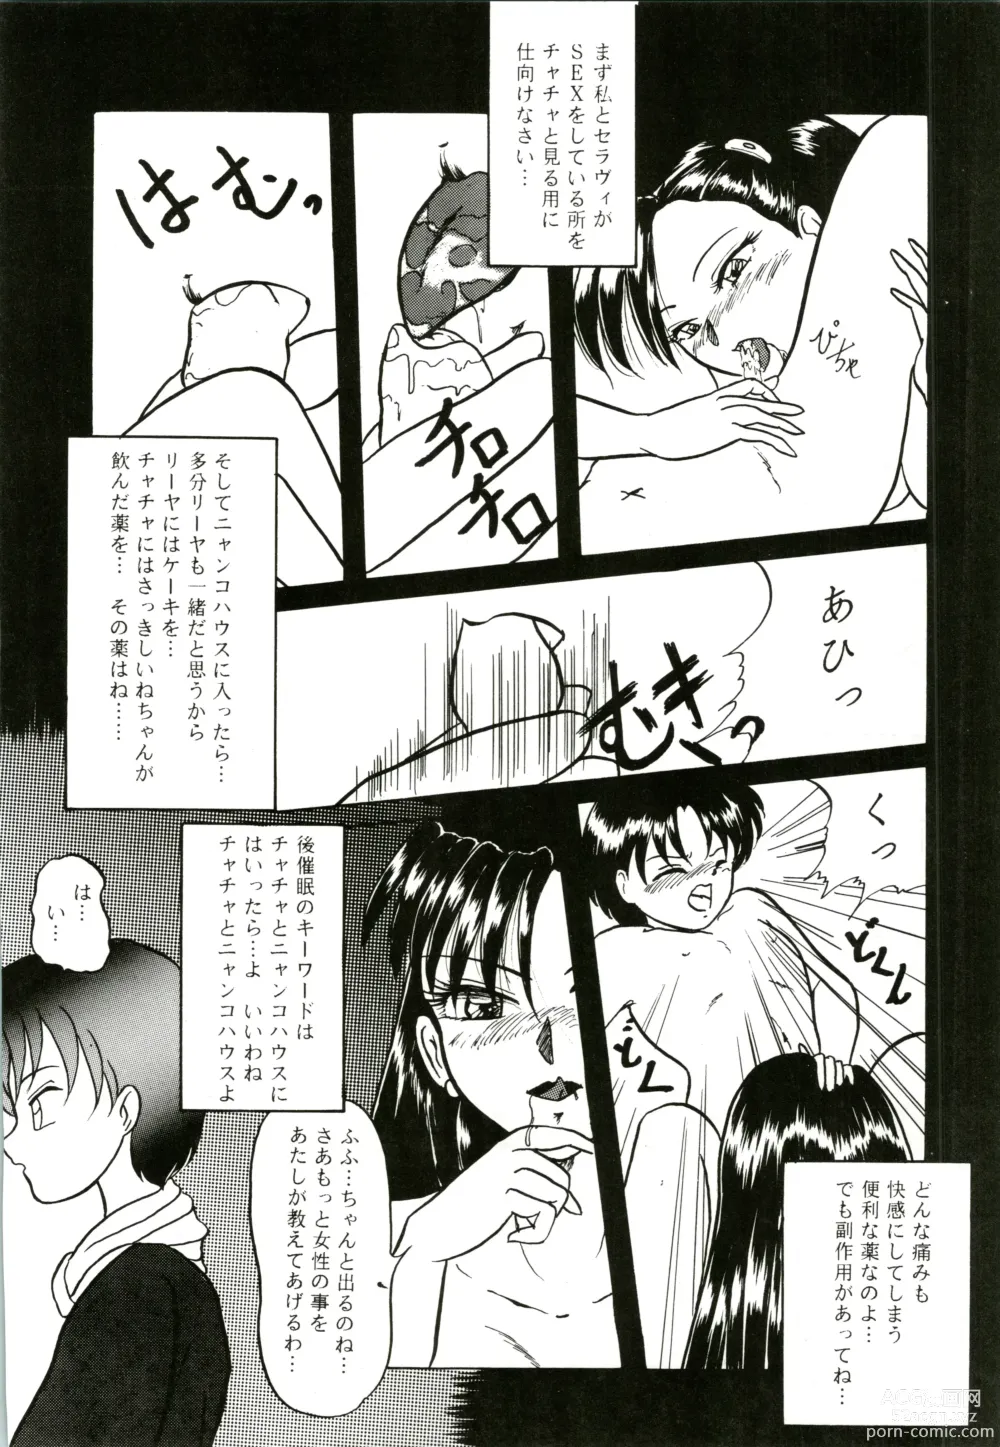 Page 54 of doujinshi PROMINENT 4